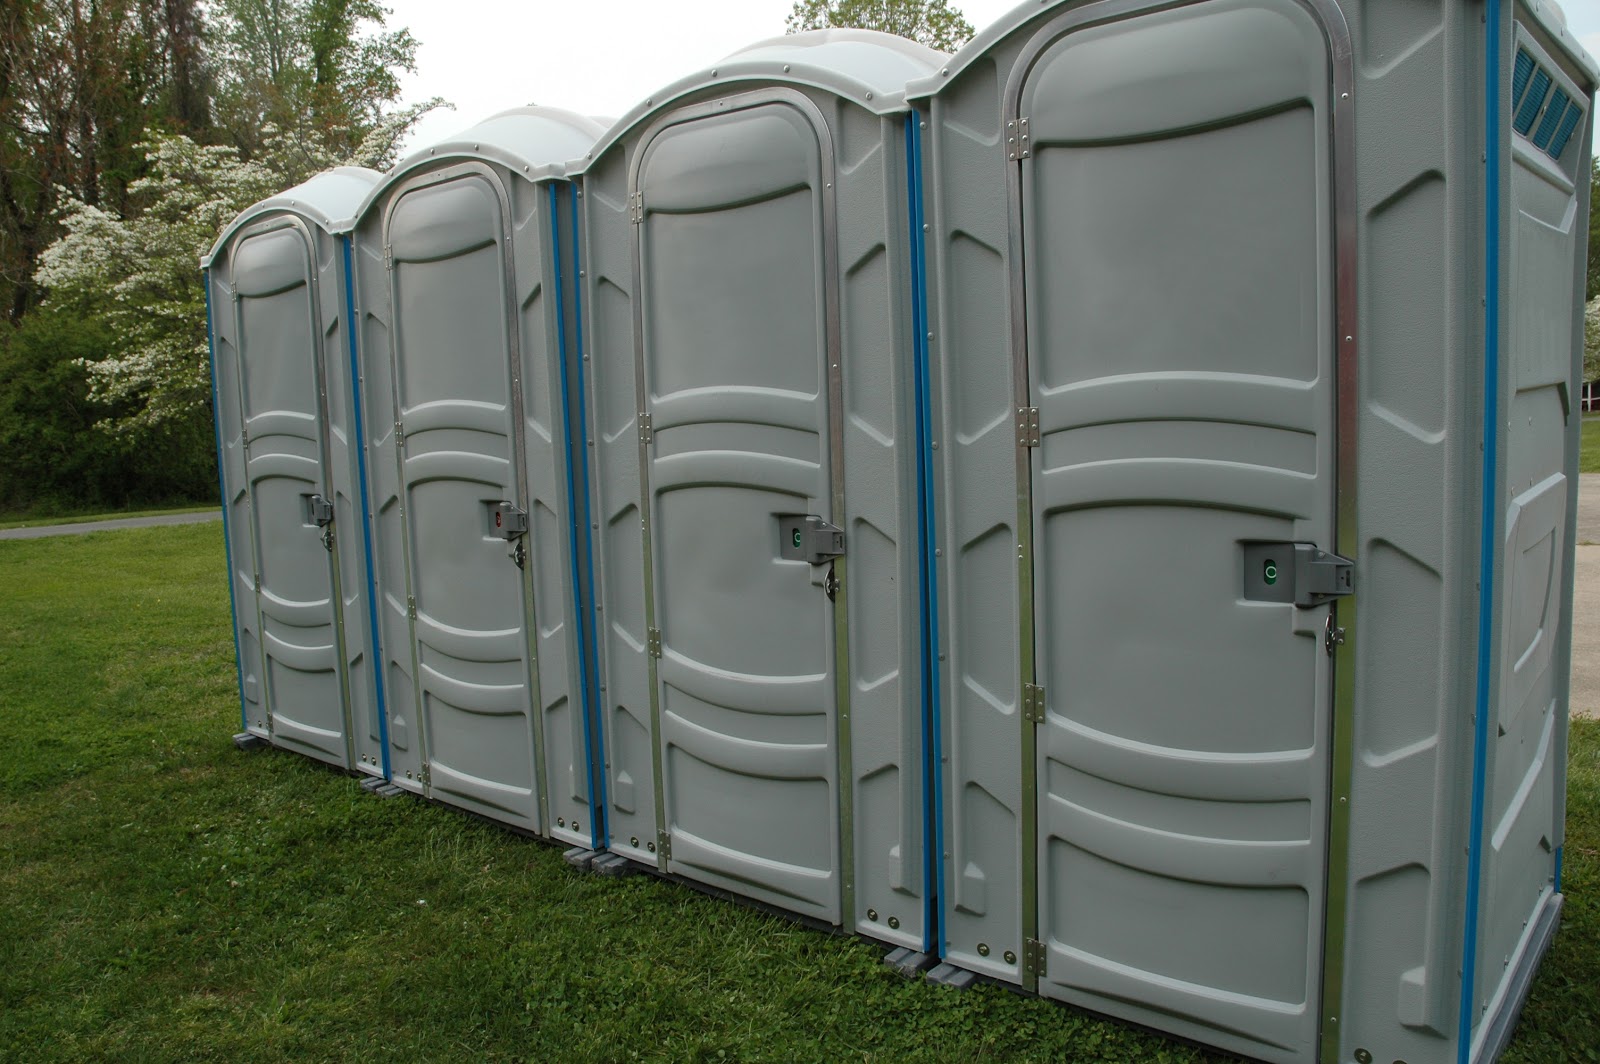 What Regulations Should Portable Restroom Operators Pay Attention To?